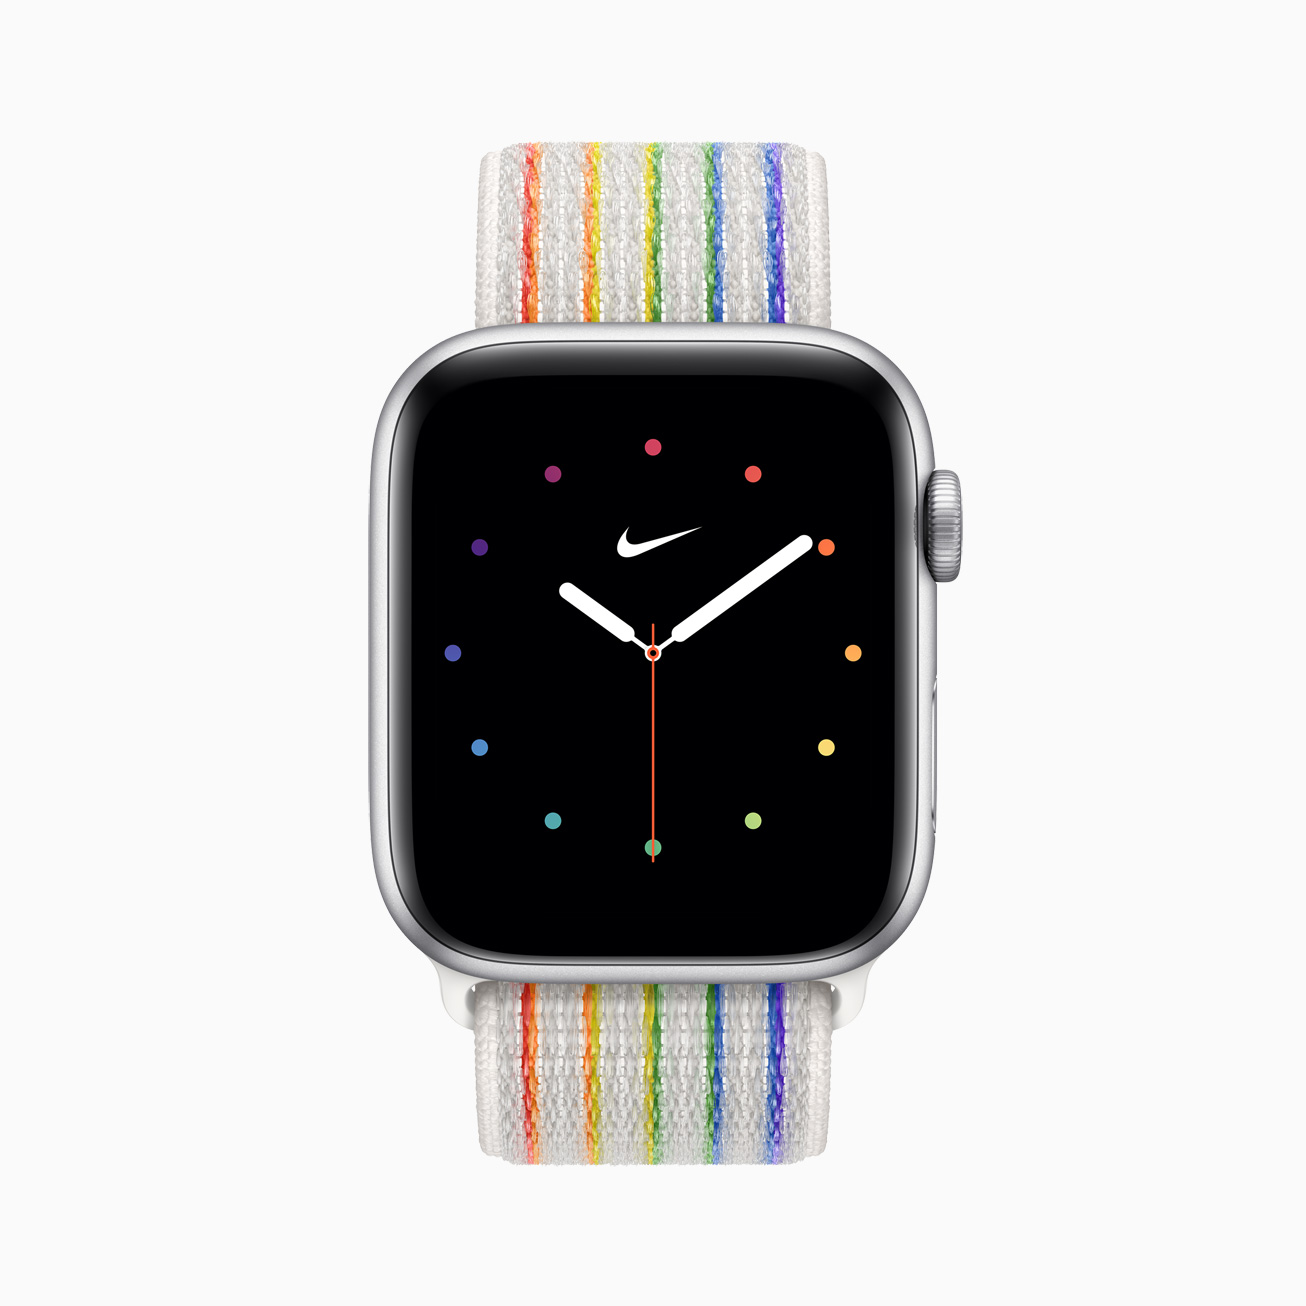 Apple Watch Pride Edition bands celebrate the diverse LGBTQ+ movement